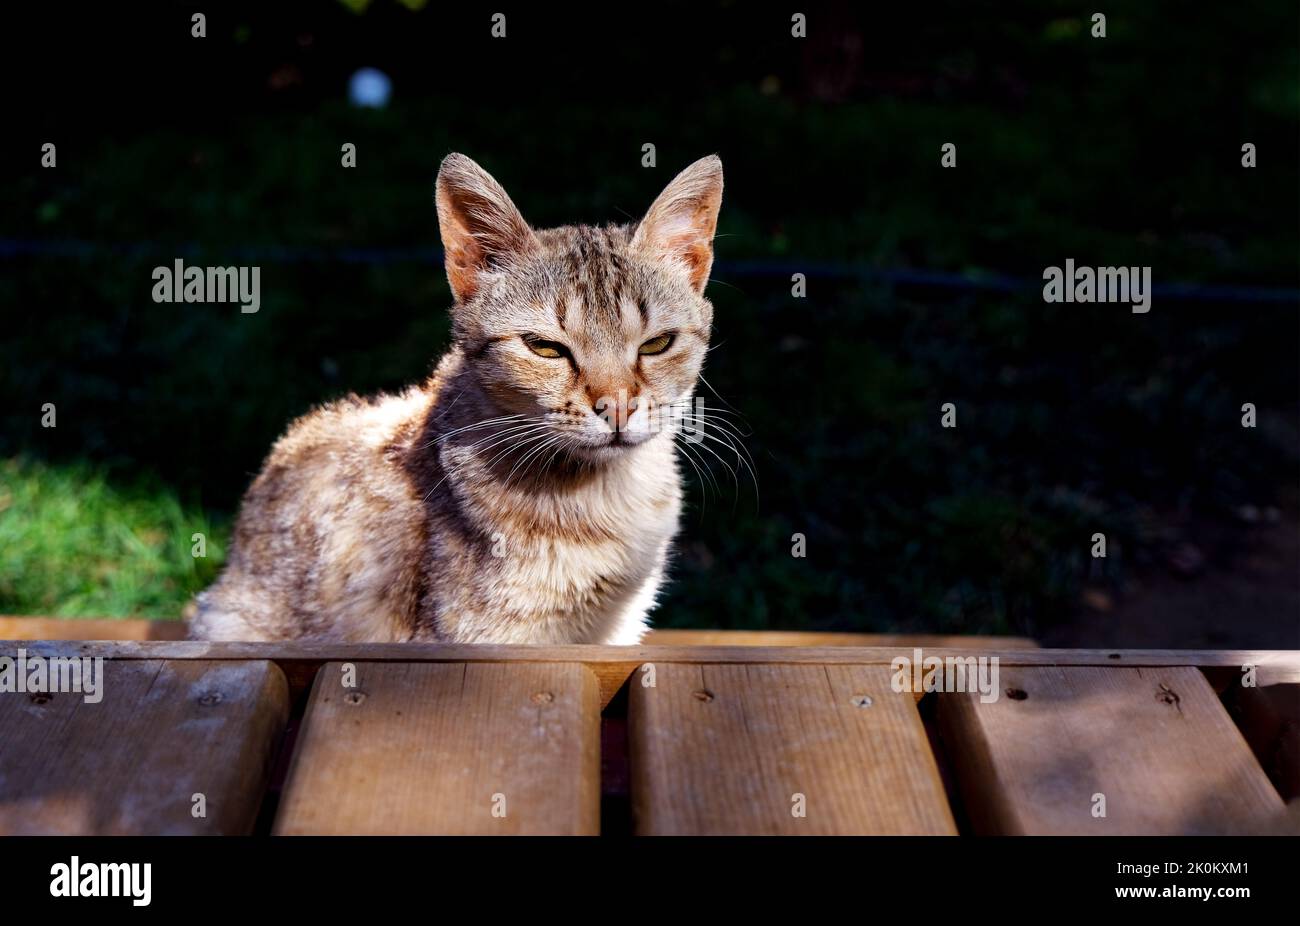 Close-up of grumpy striped young cat sitting outside. Stock Photo